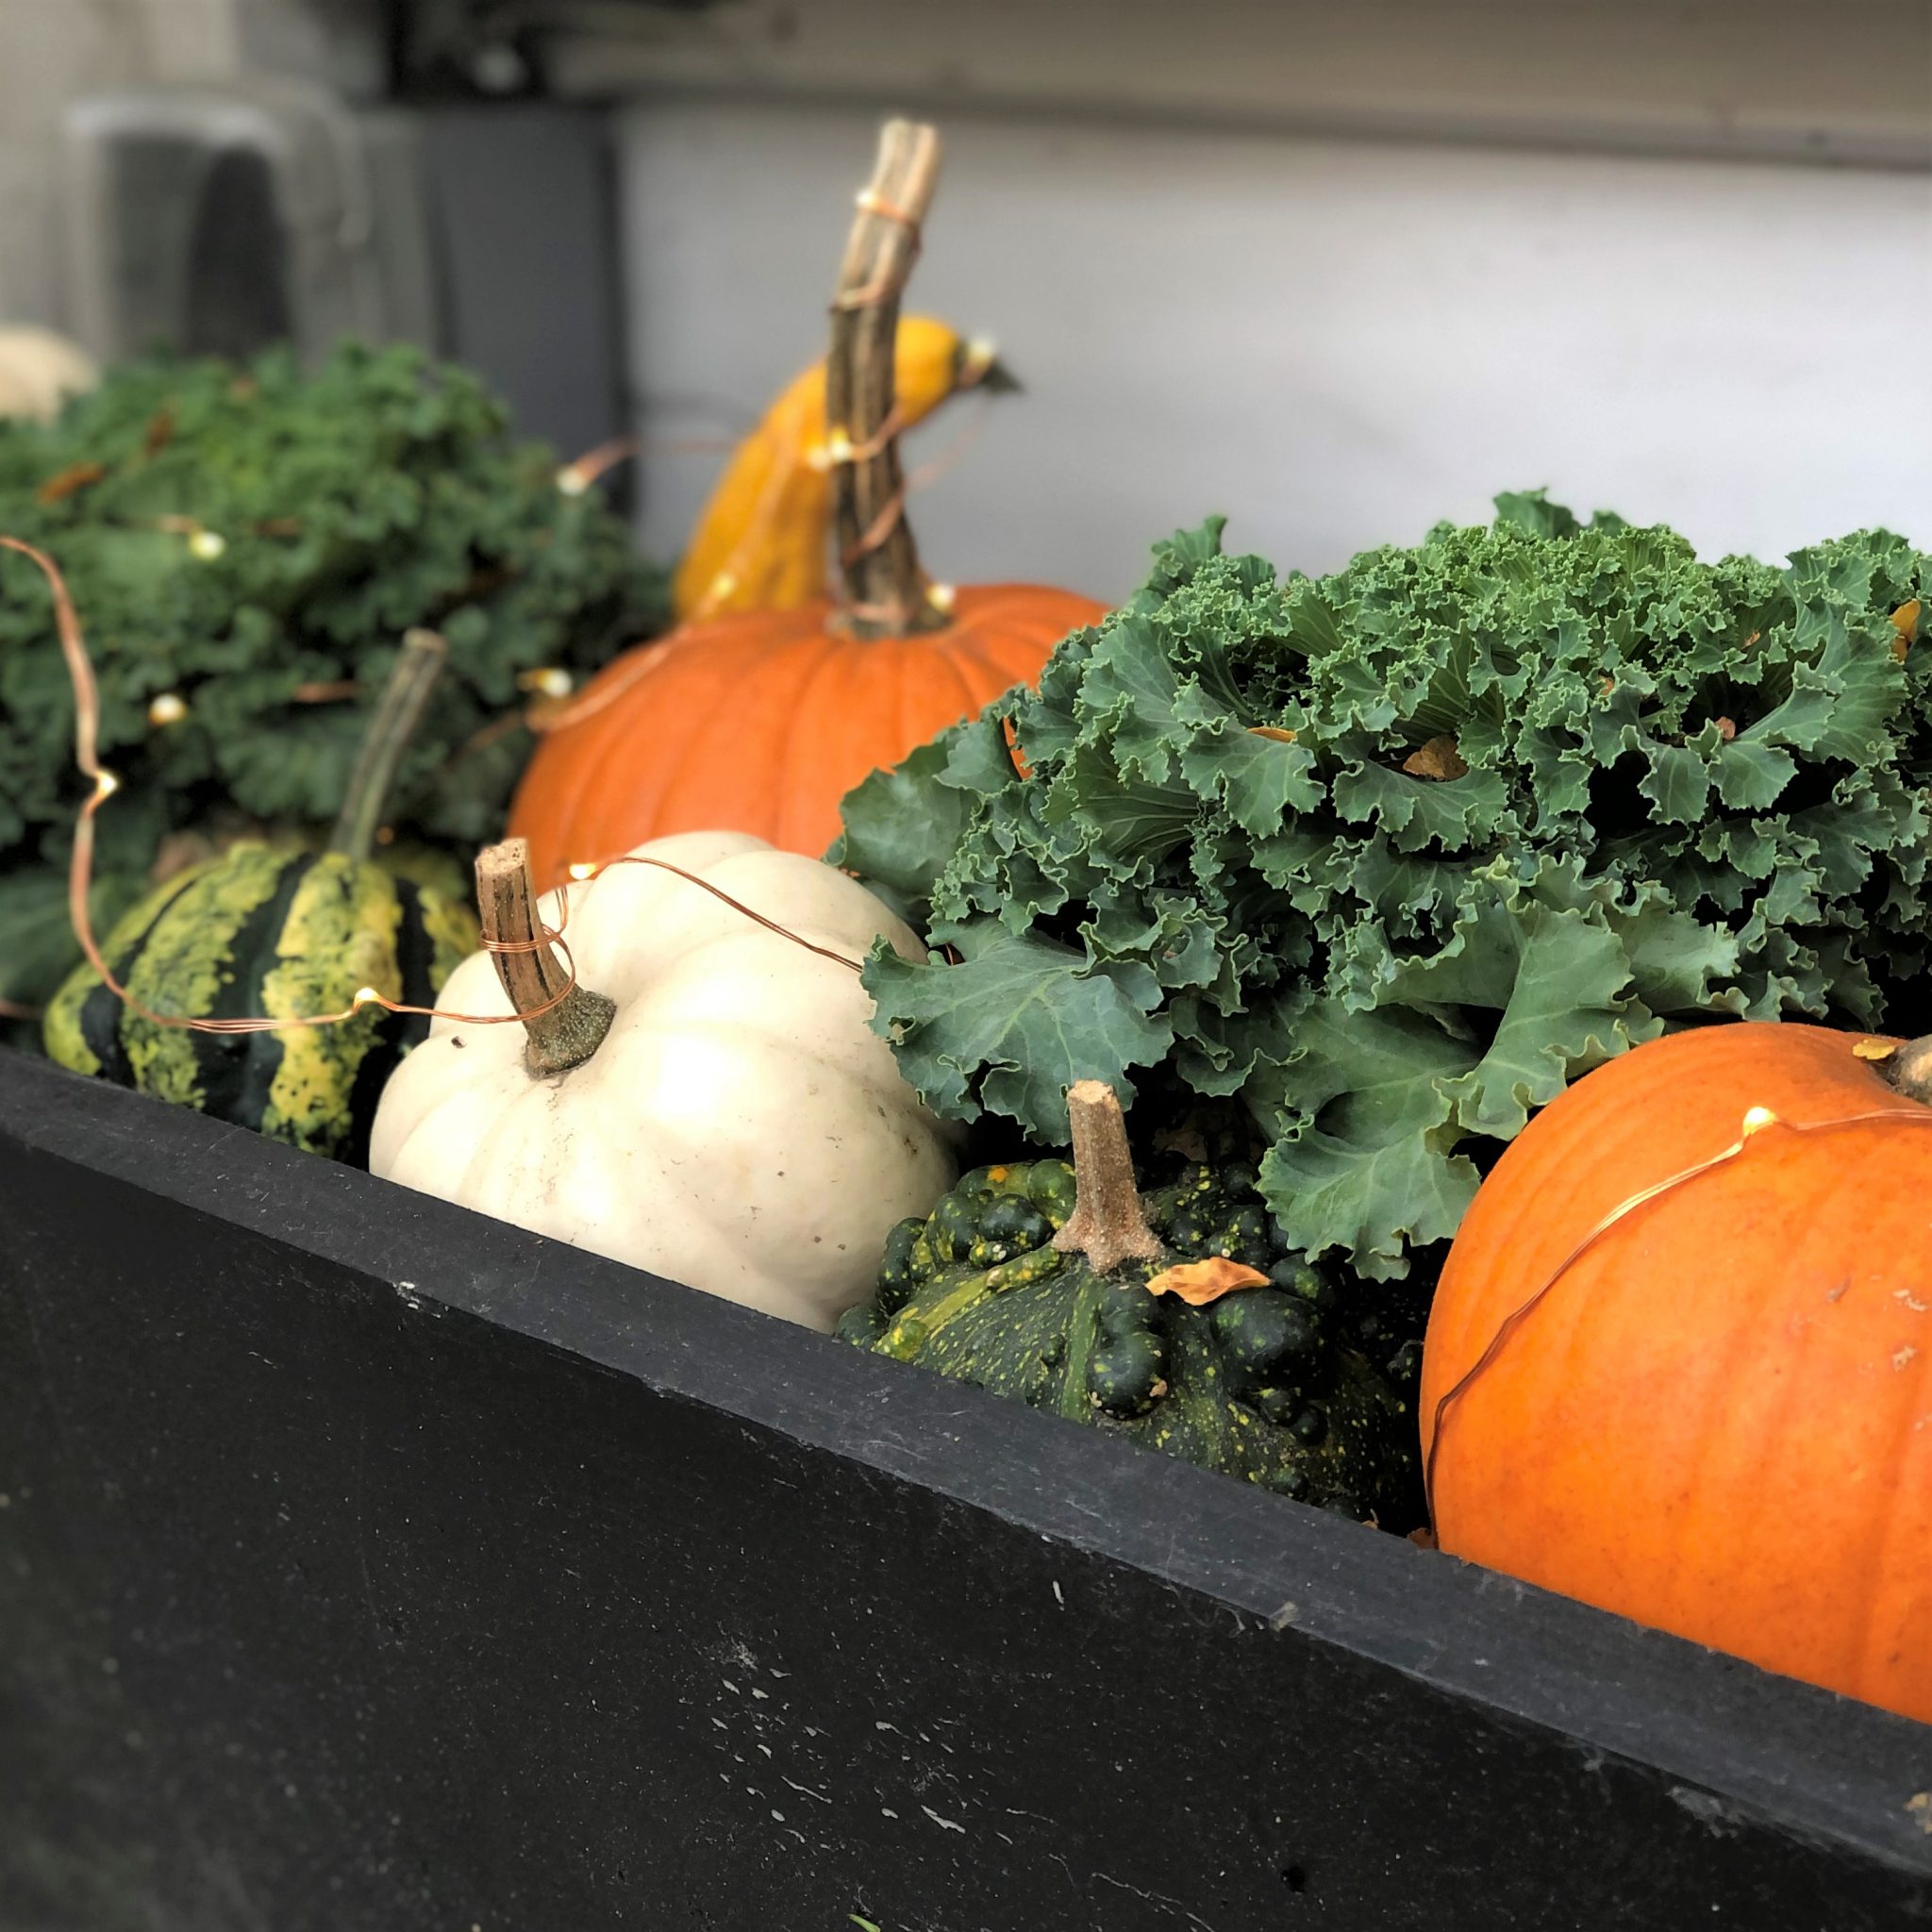 Twinkle lights intertwined with pumpkins, gourds, and kale in a flower box